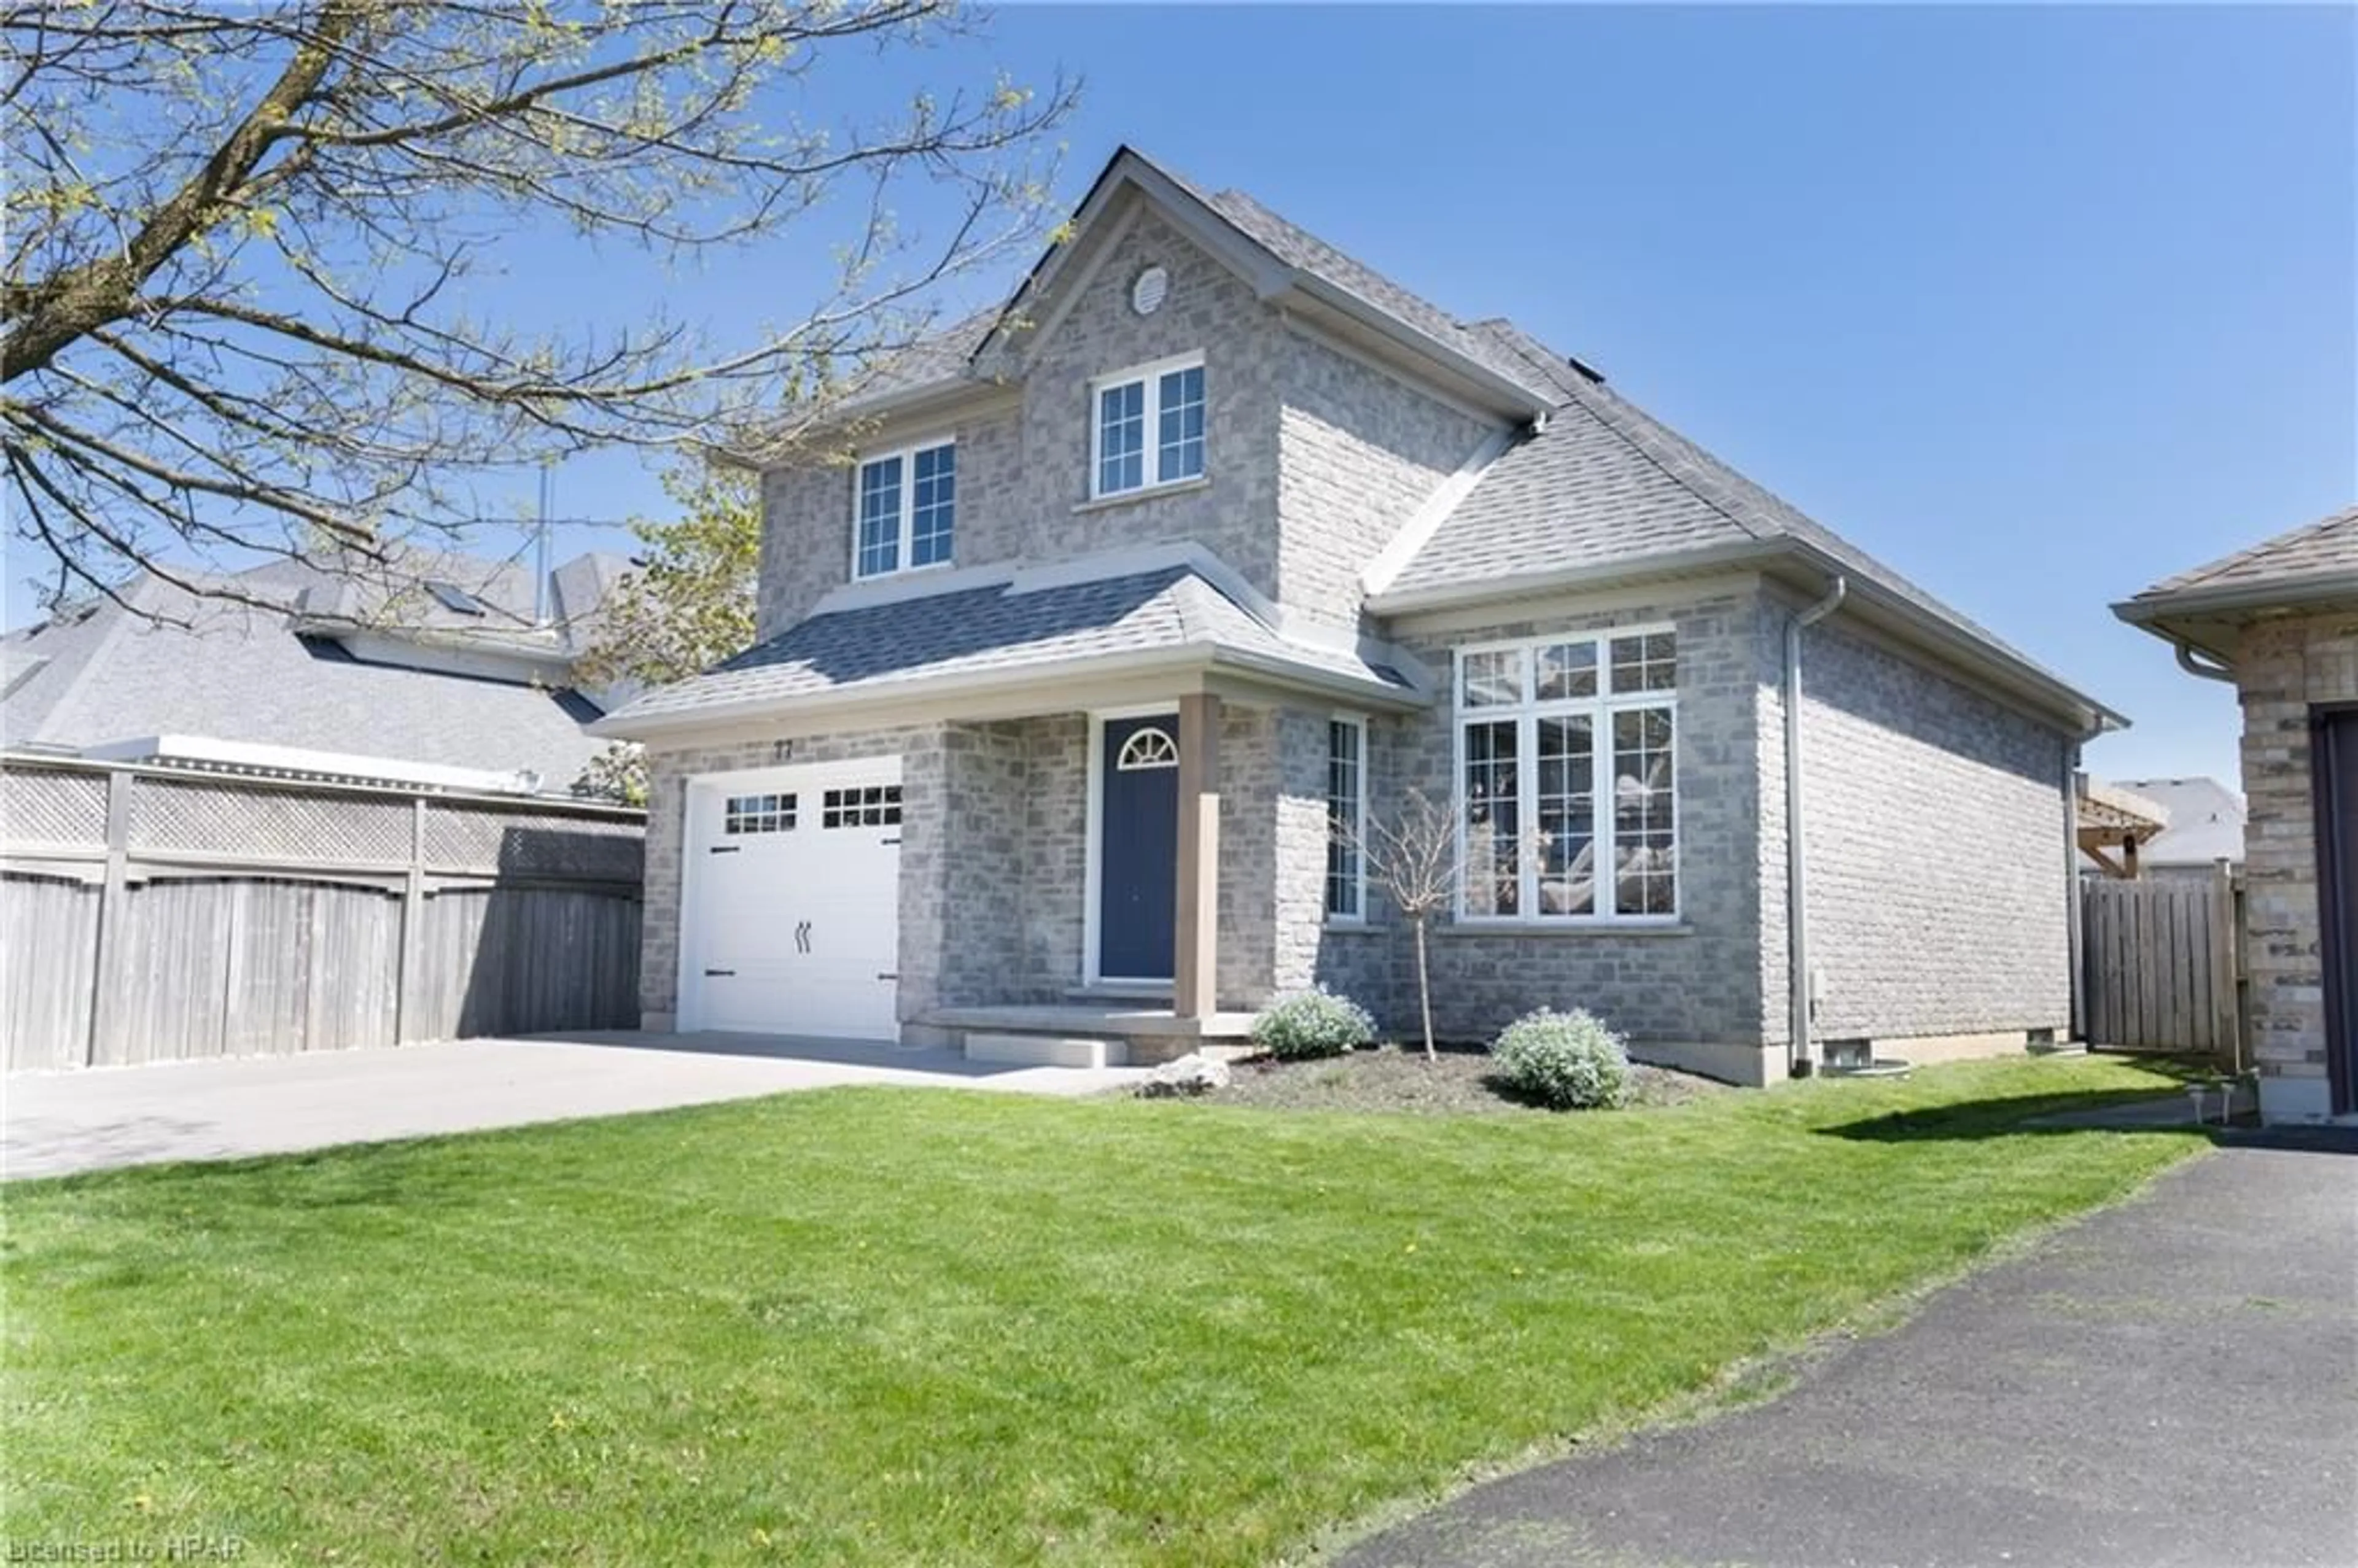 Frontside or backside of a home for 77 Long Dr, Stratford Ontario N5A 7Y9